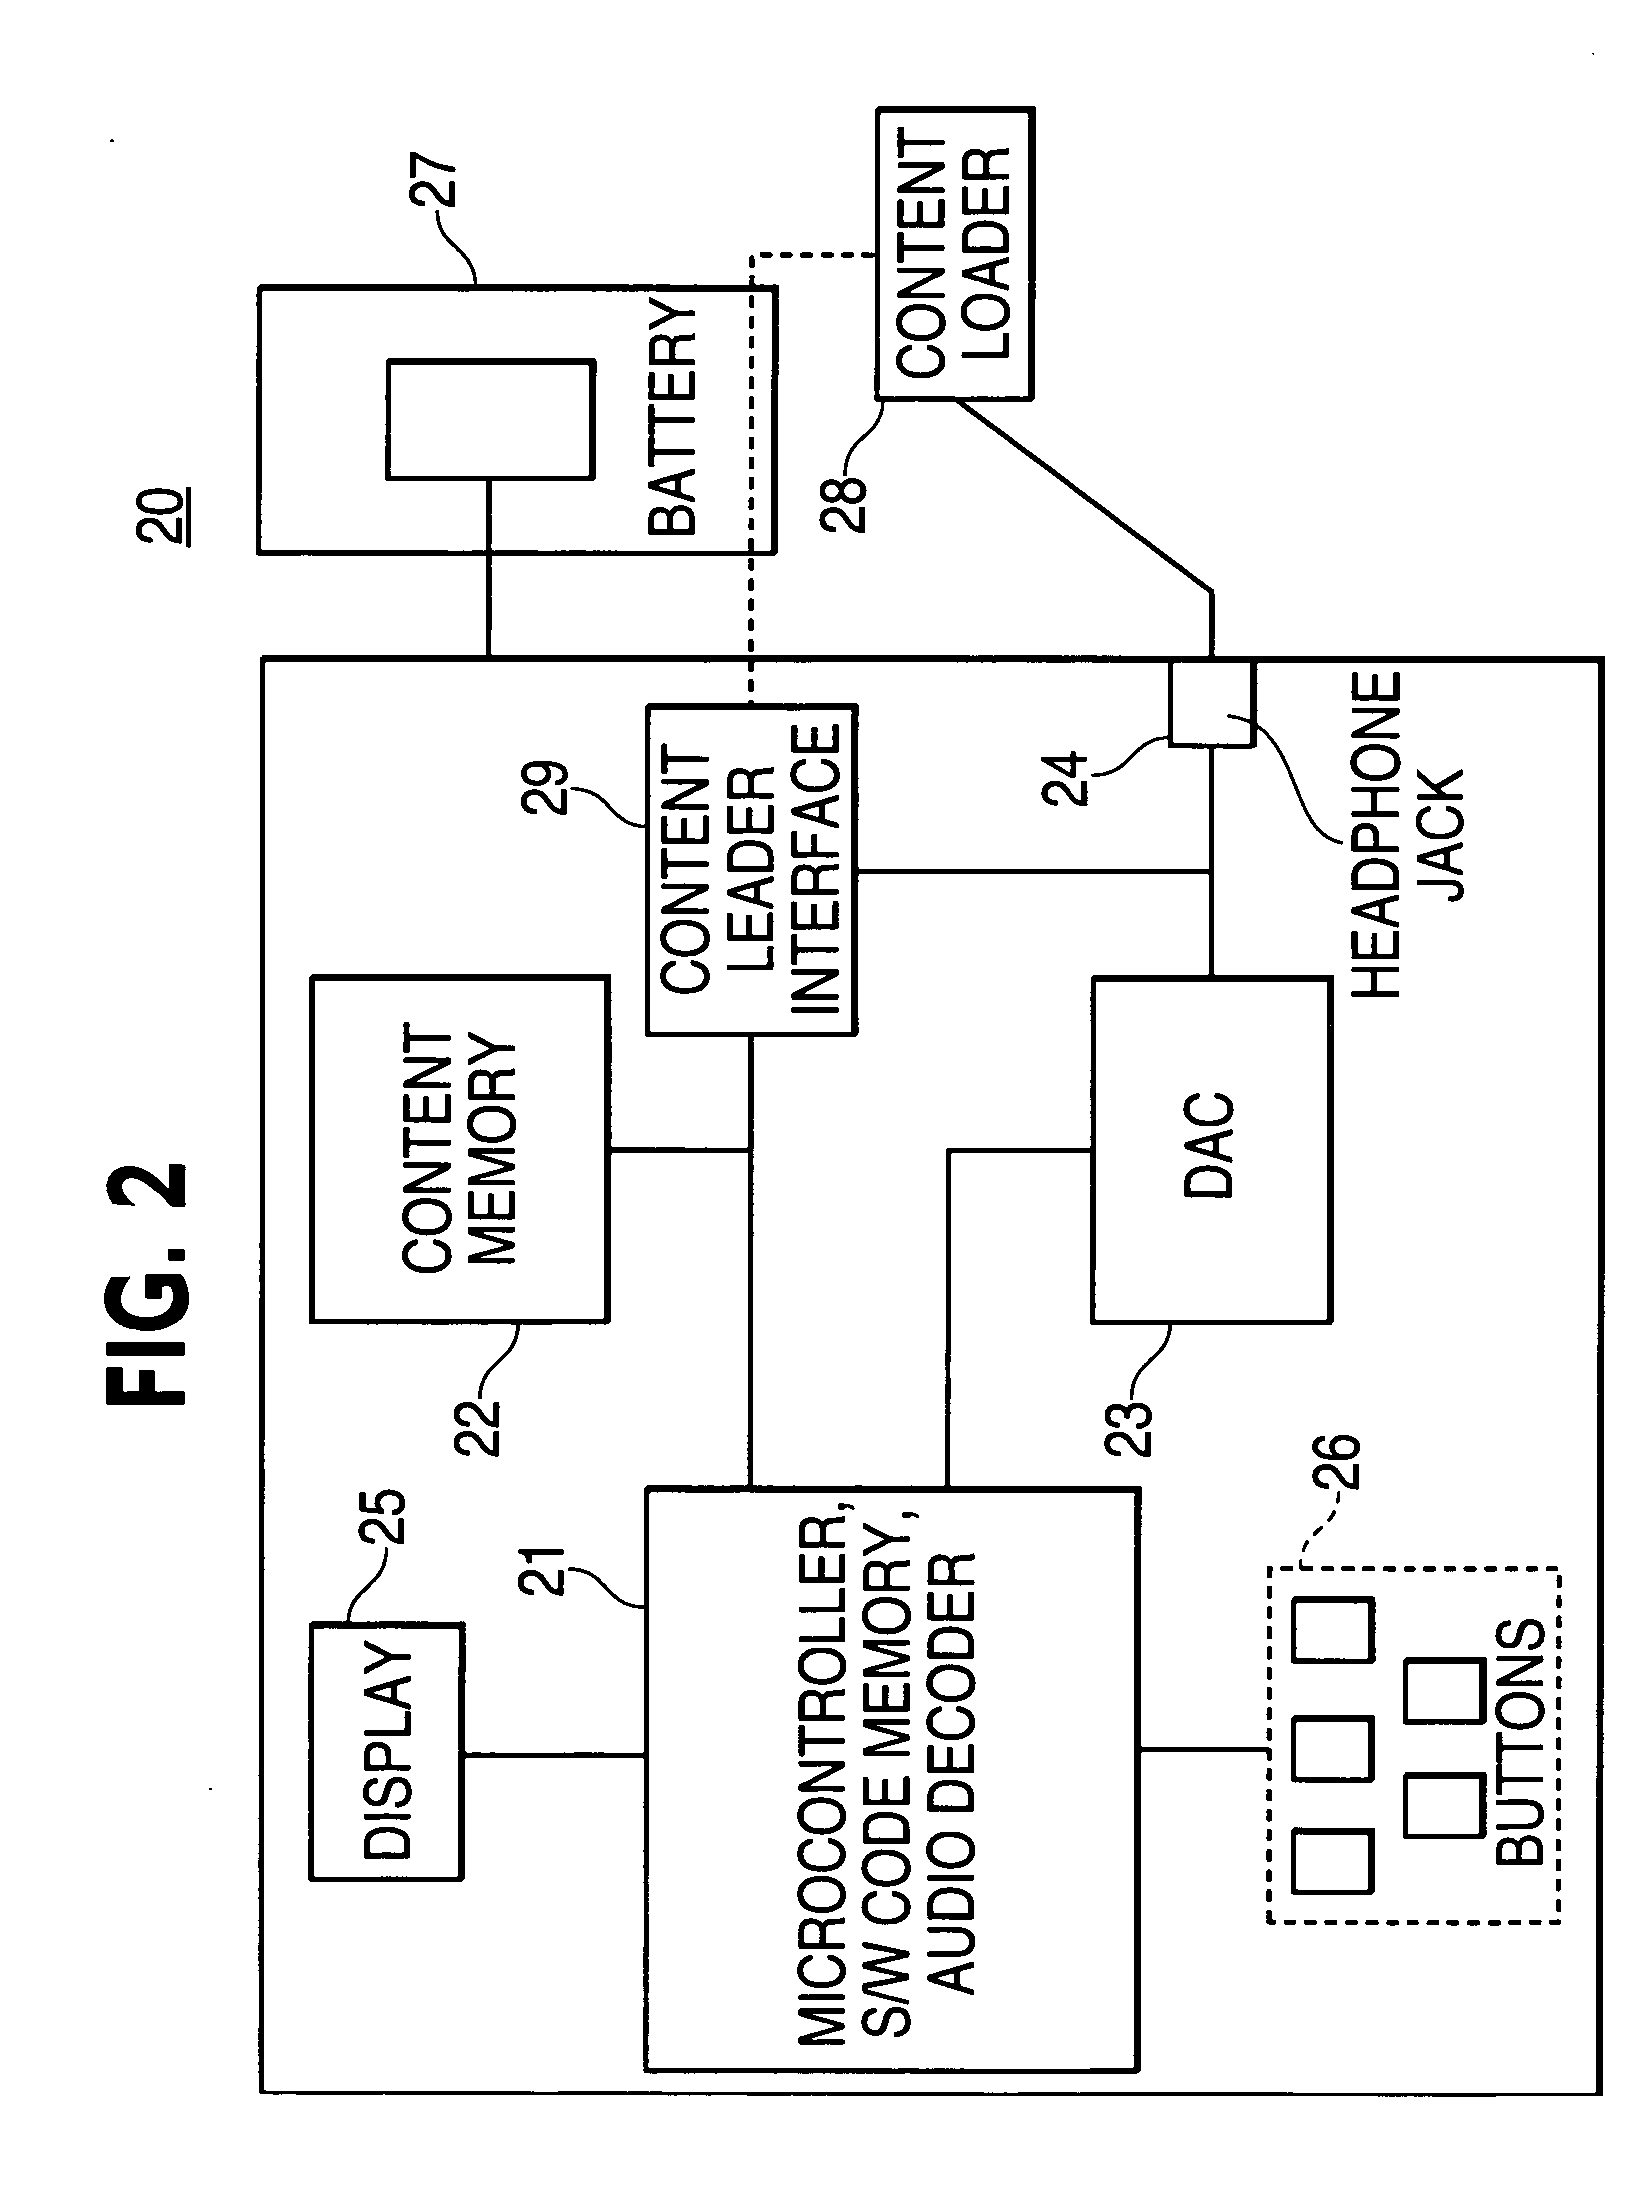 Personal media player apparatus and method